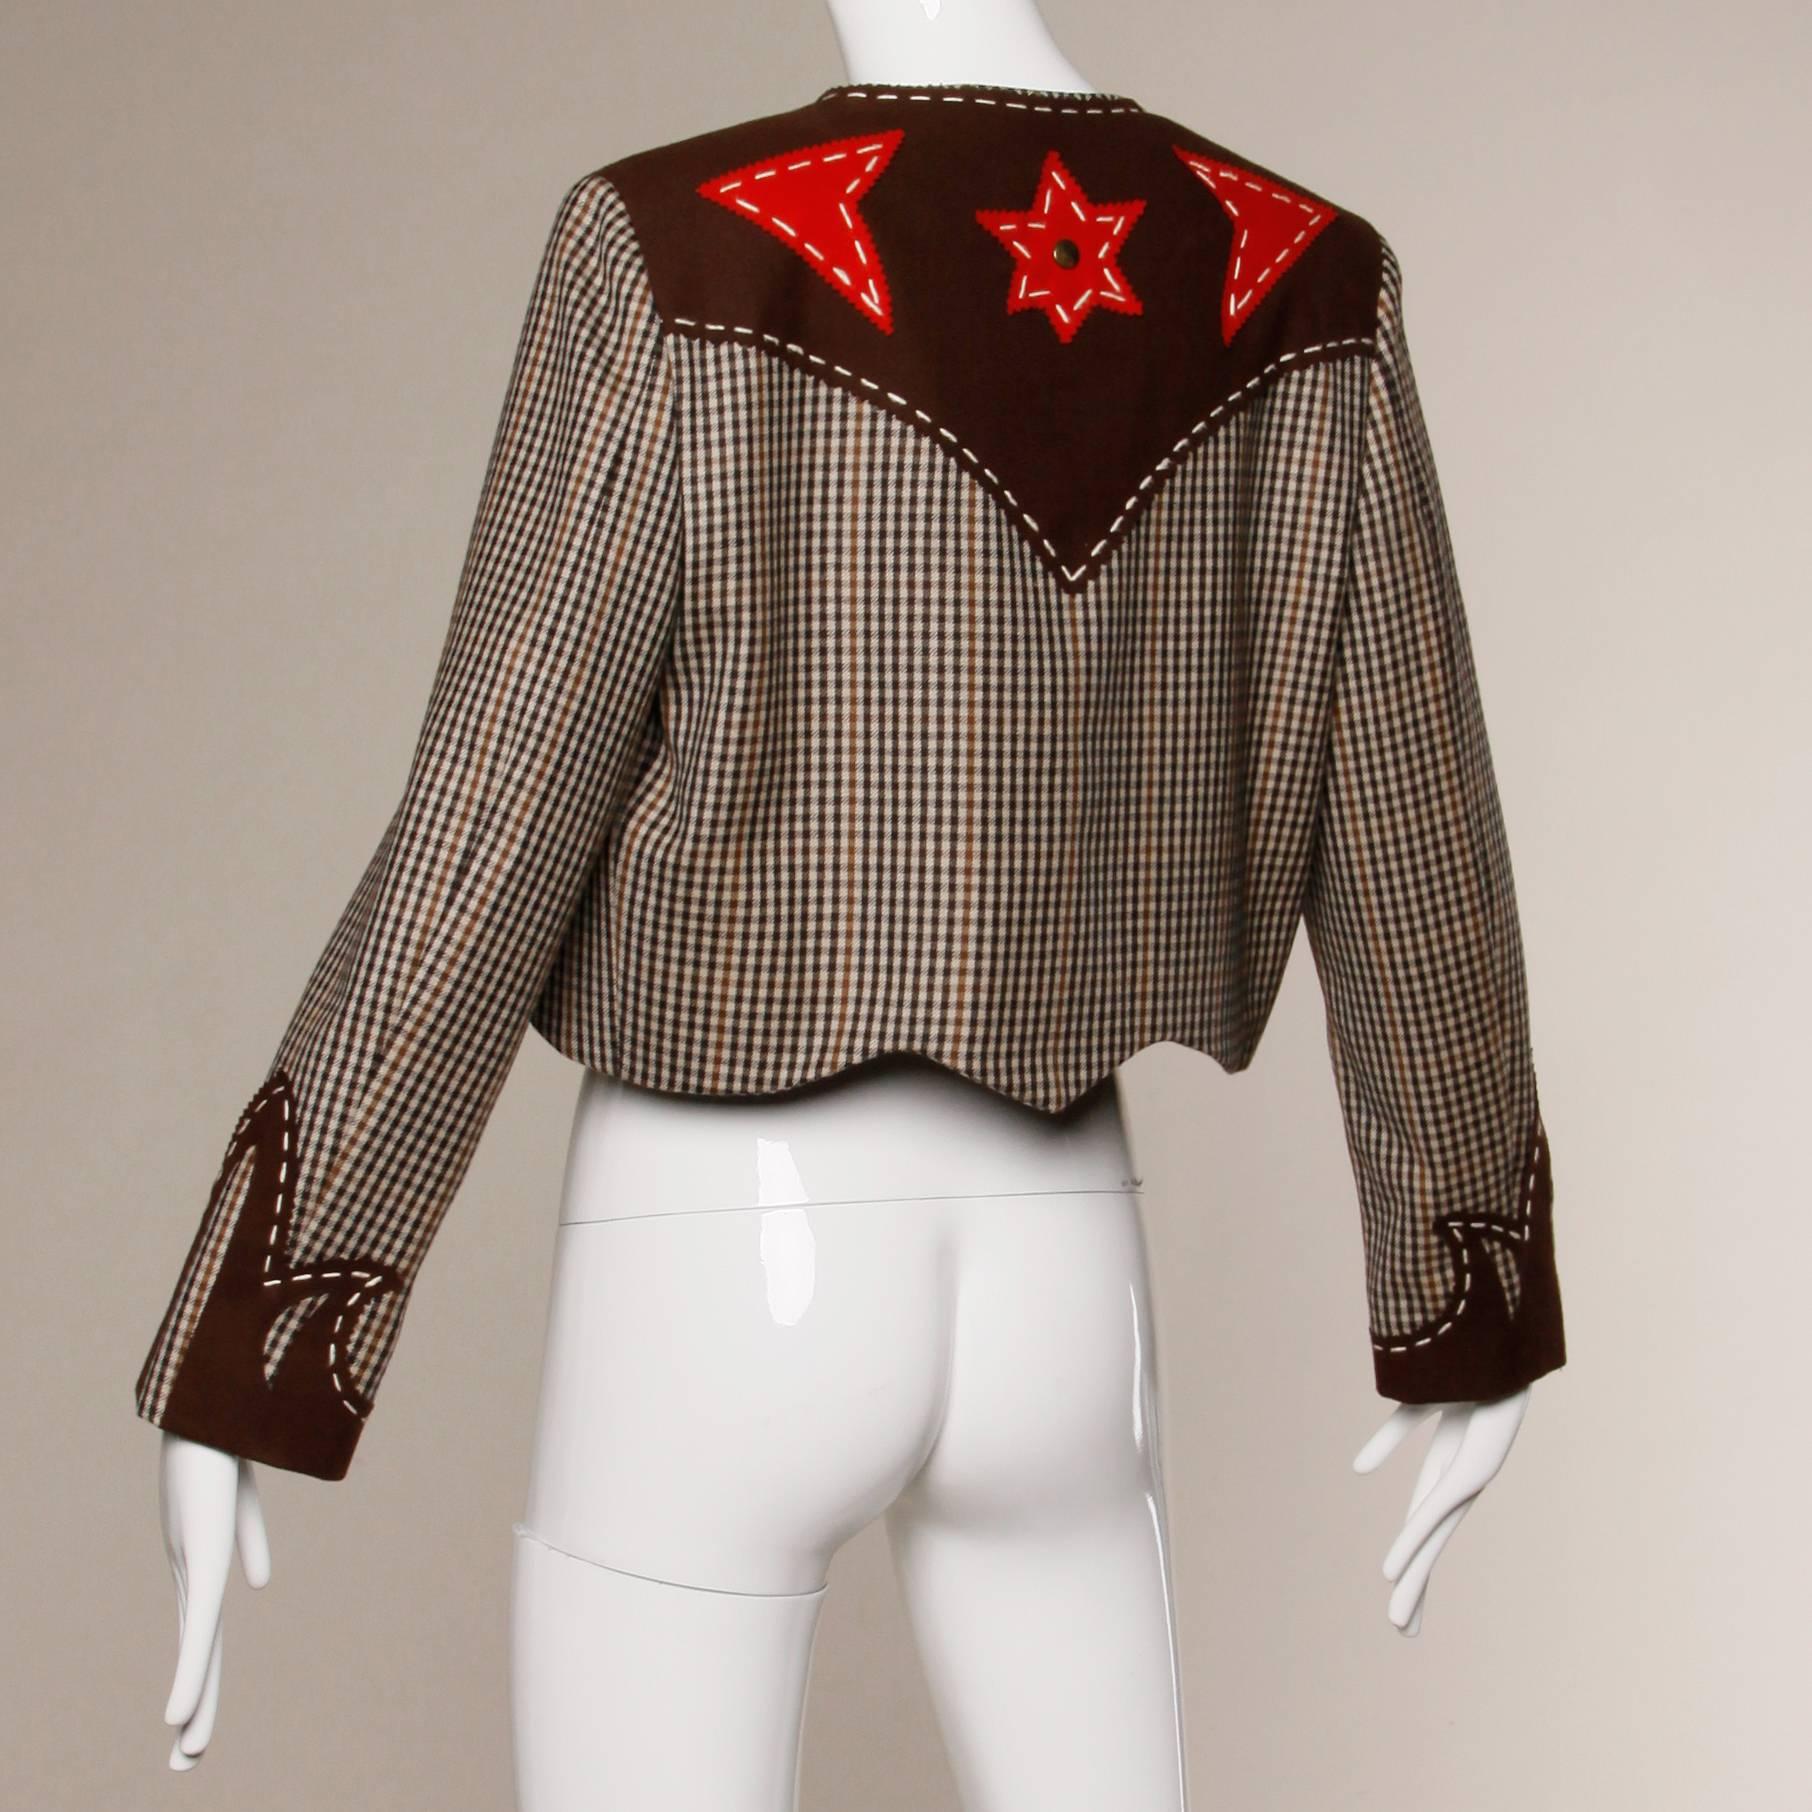 Darling vintage Western-inspired Moschino jacket with red star spur appliques and a cut out heart in the front. Contrasting oversize stitching with single front hook closure. Fully lined. Marked size is a US 10. The bust measures 38